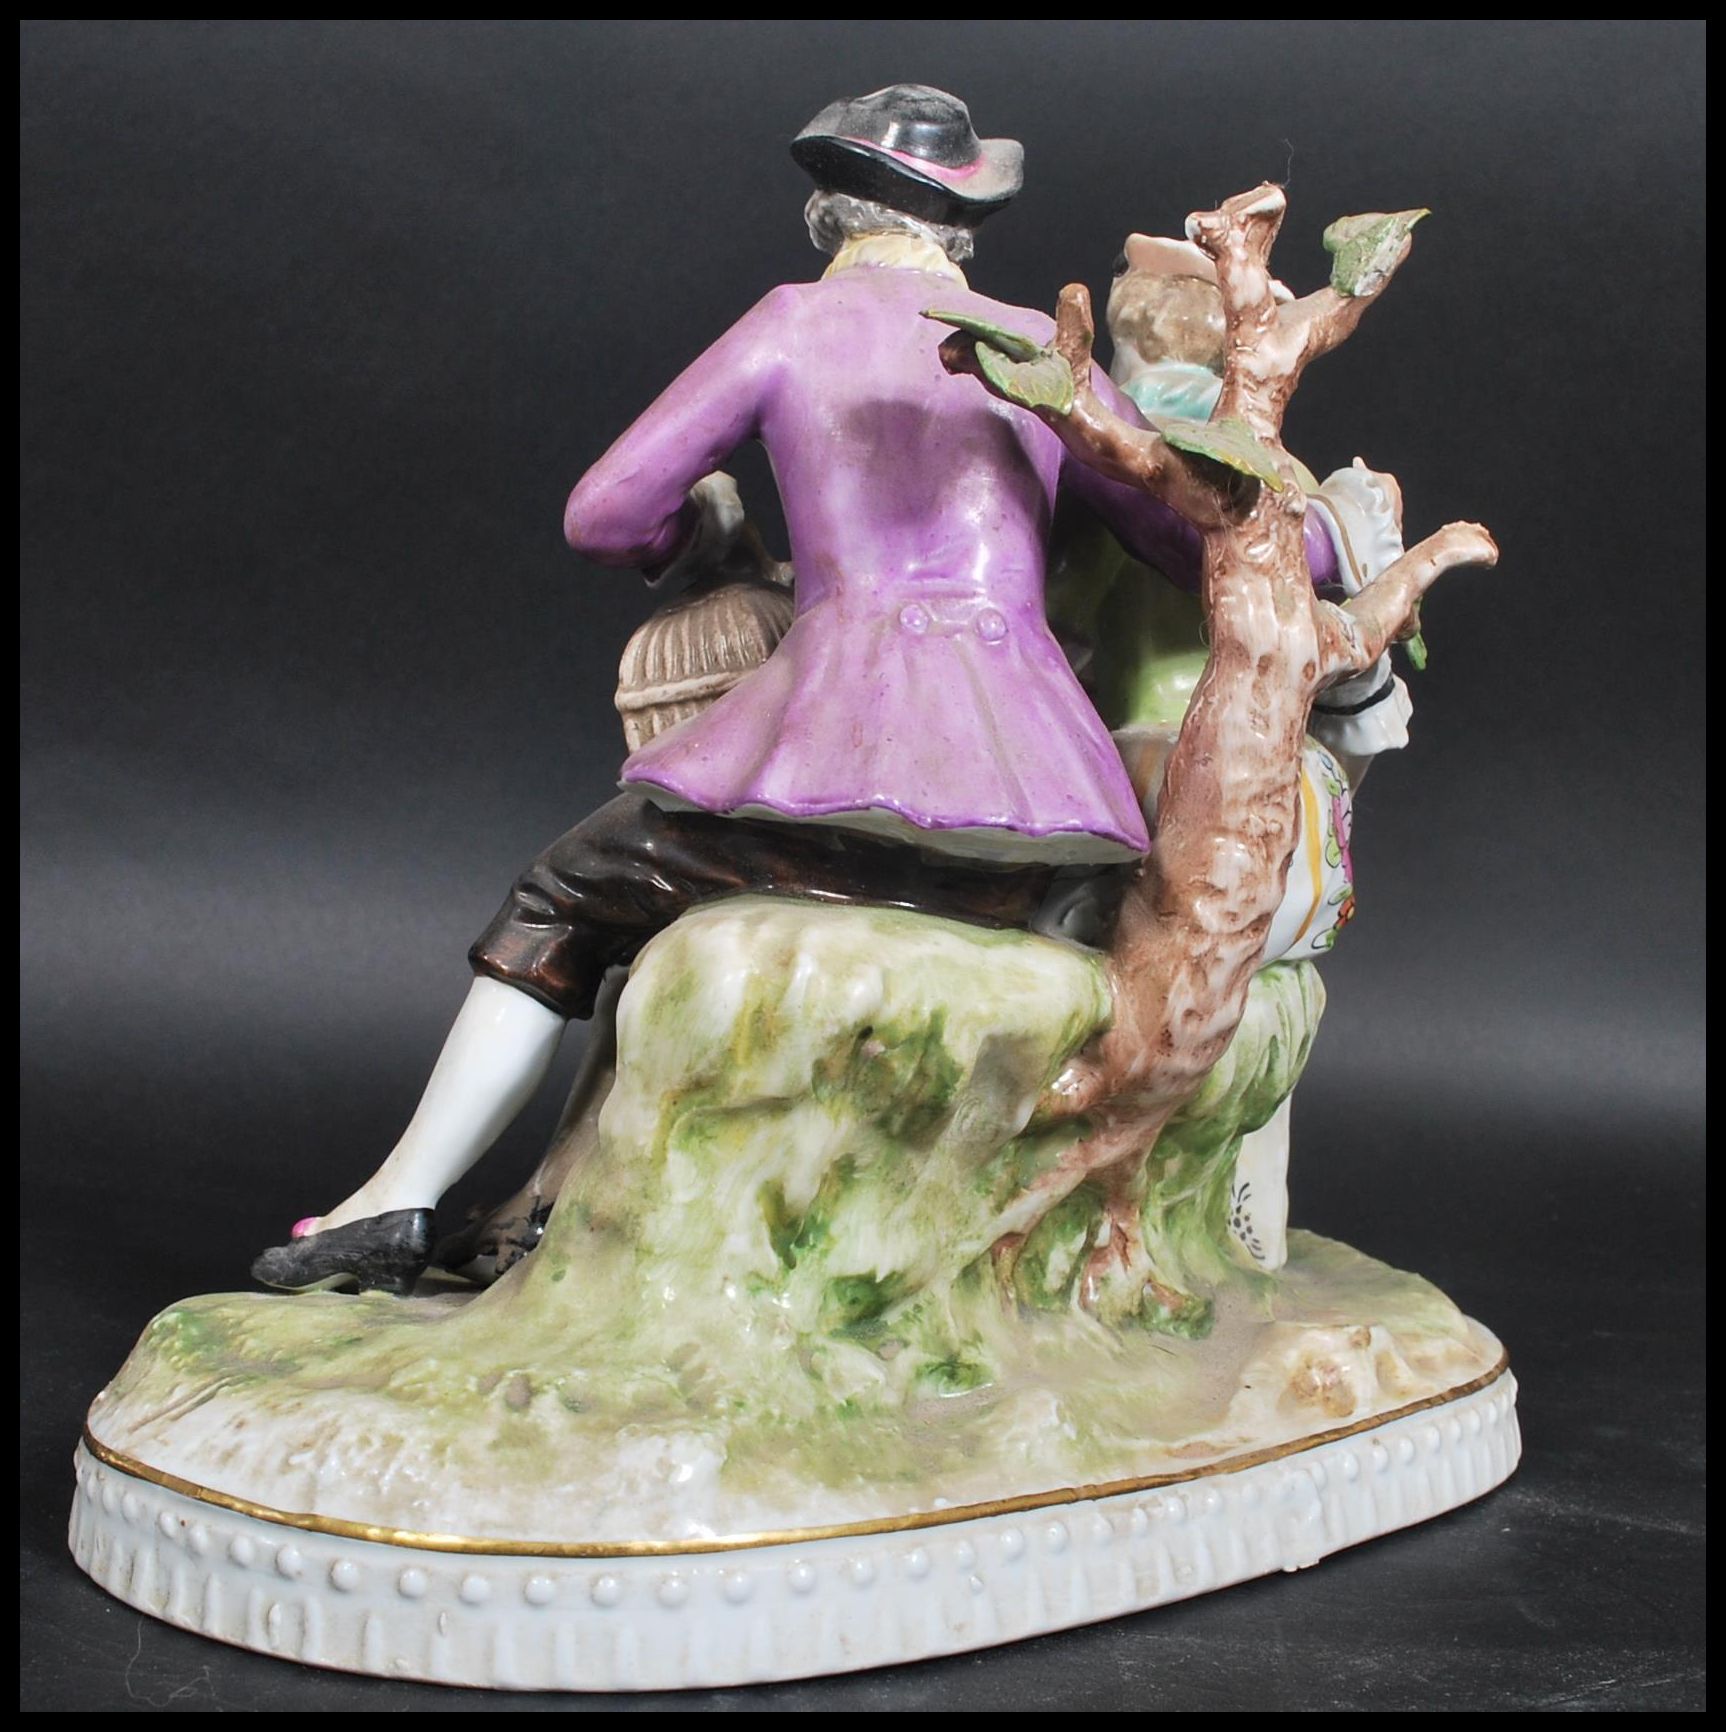 A 19th century Wilhelm Rittirsch German diorama figure group. The figurine depicting a family with - Image 4 of 9